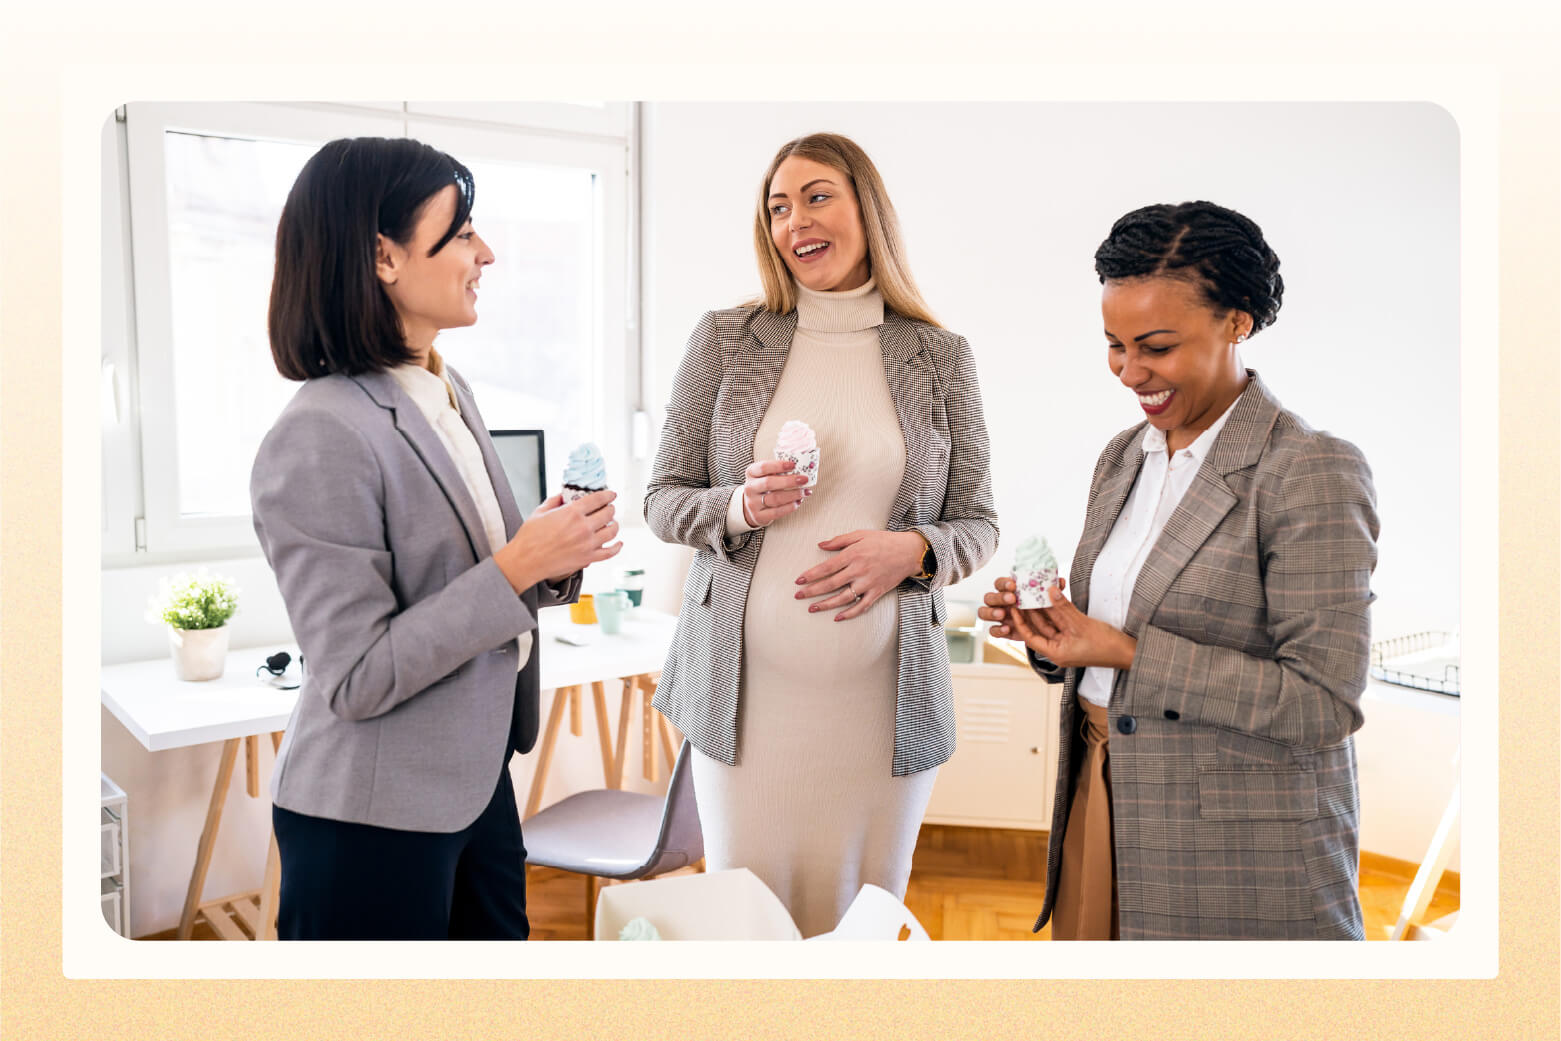 Three women in business attire stand in office holding cupcakes while talking to each other